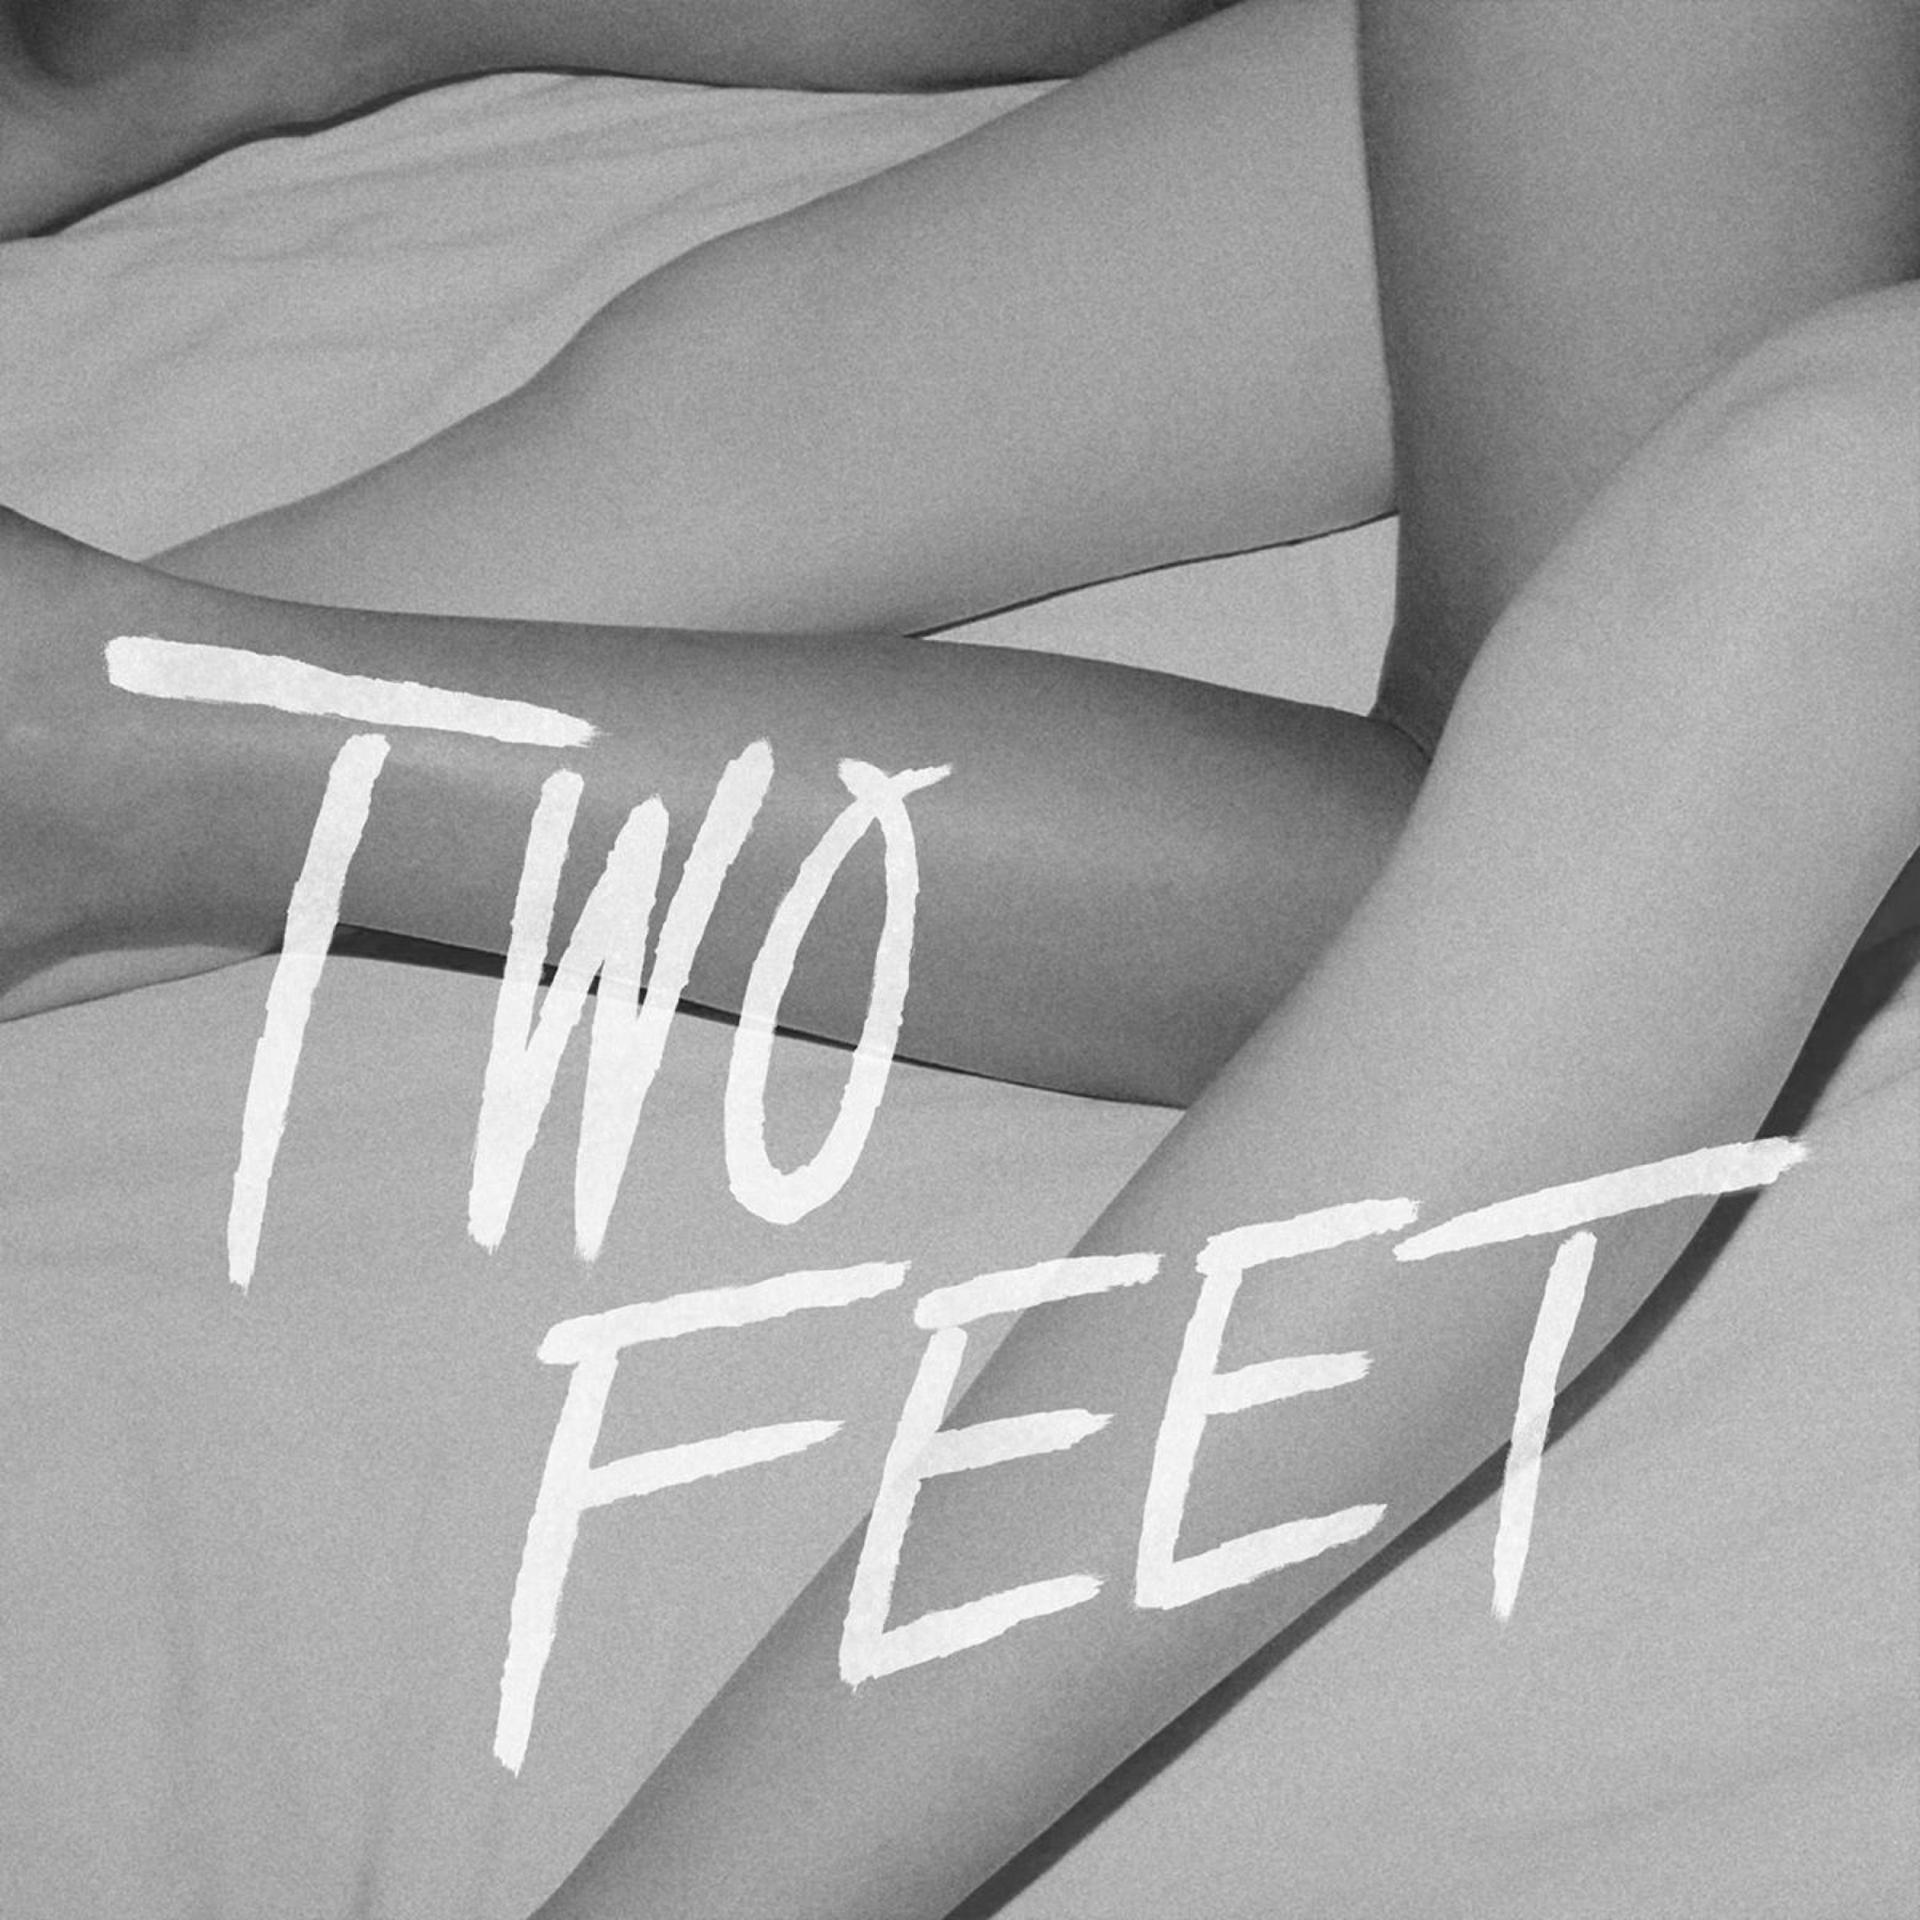 Two ft. Two feet - first steps (2016). Two feet певец. Two feet обложка. Two feet альбом.